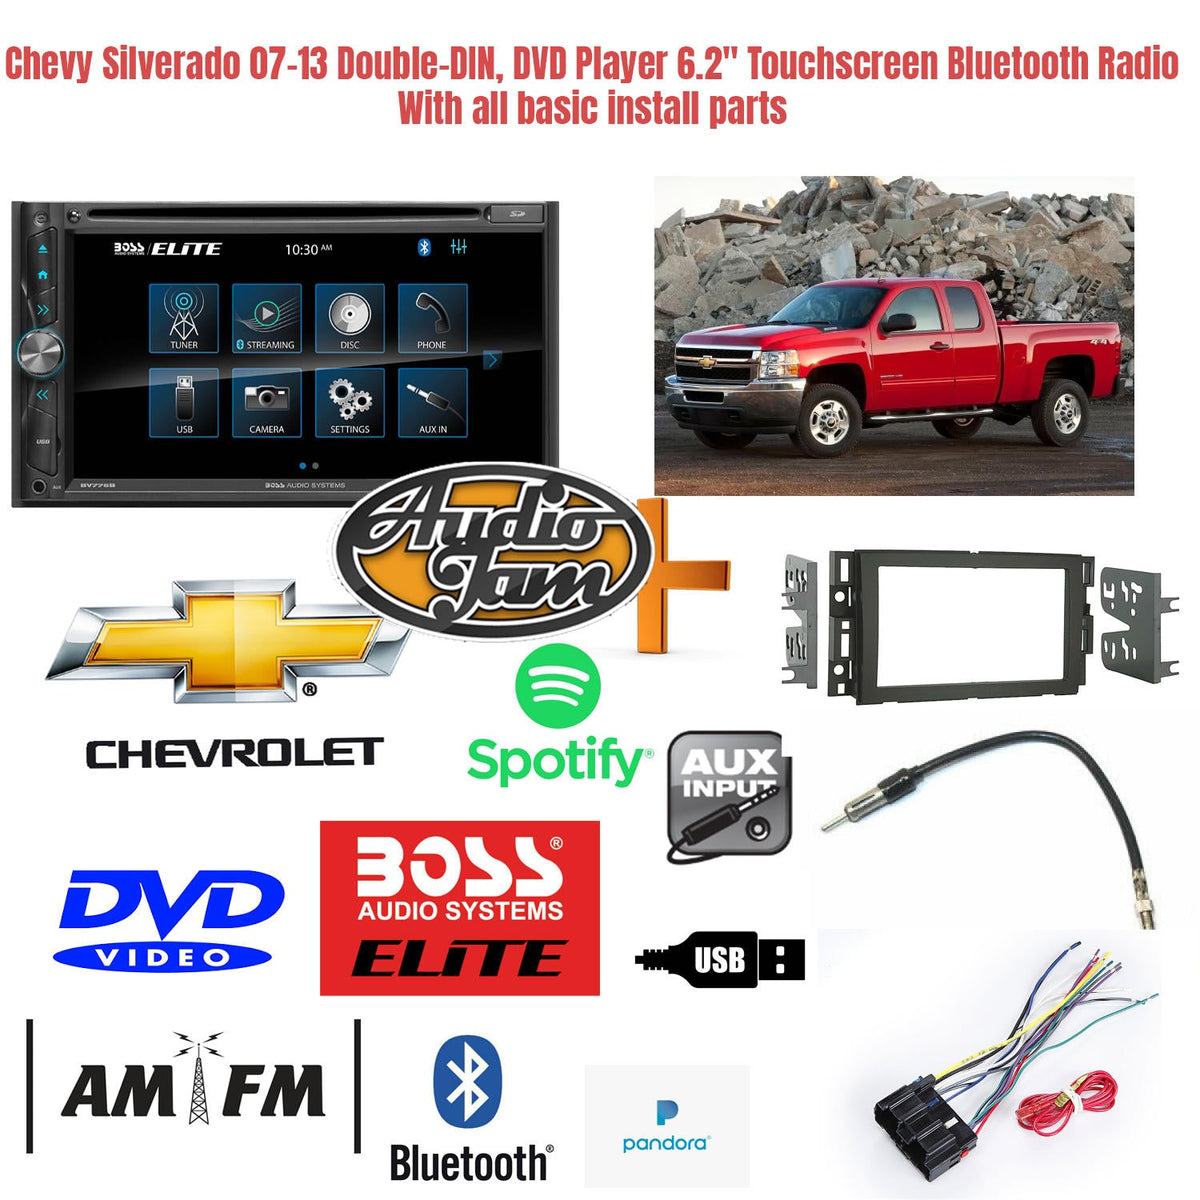 Touchscreen Bluetooth DVD Player For 2007-13 Chevy Silverado With Install Parts